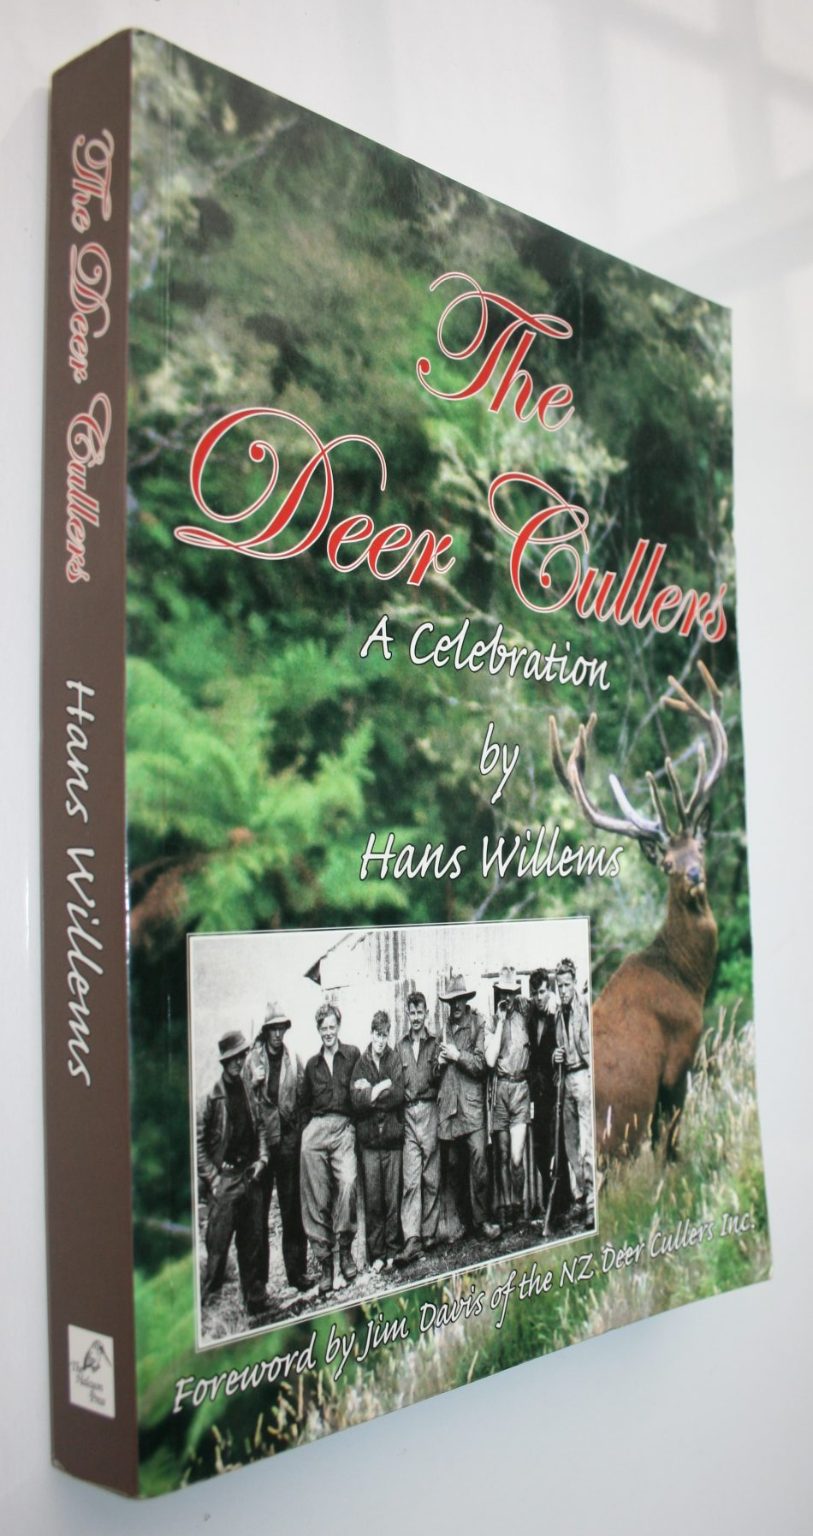 The Deer Cullers A Celebration By Hans Willems. 2009, VERY SCARCE.